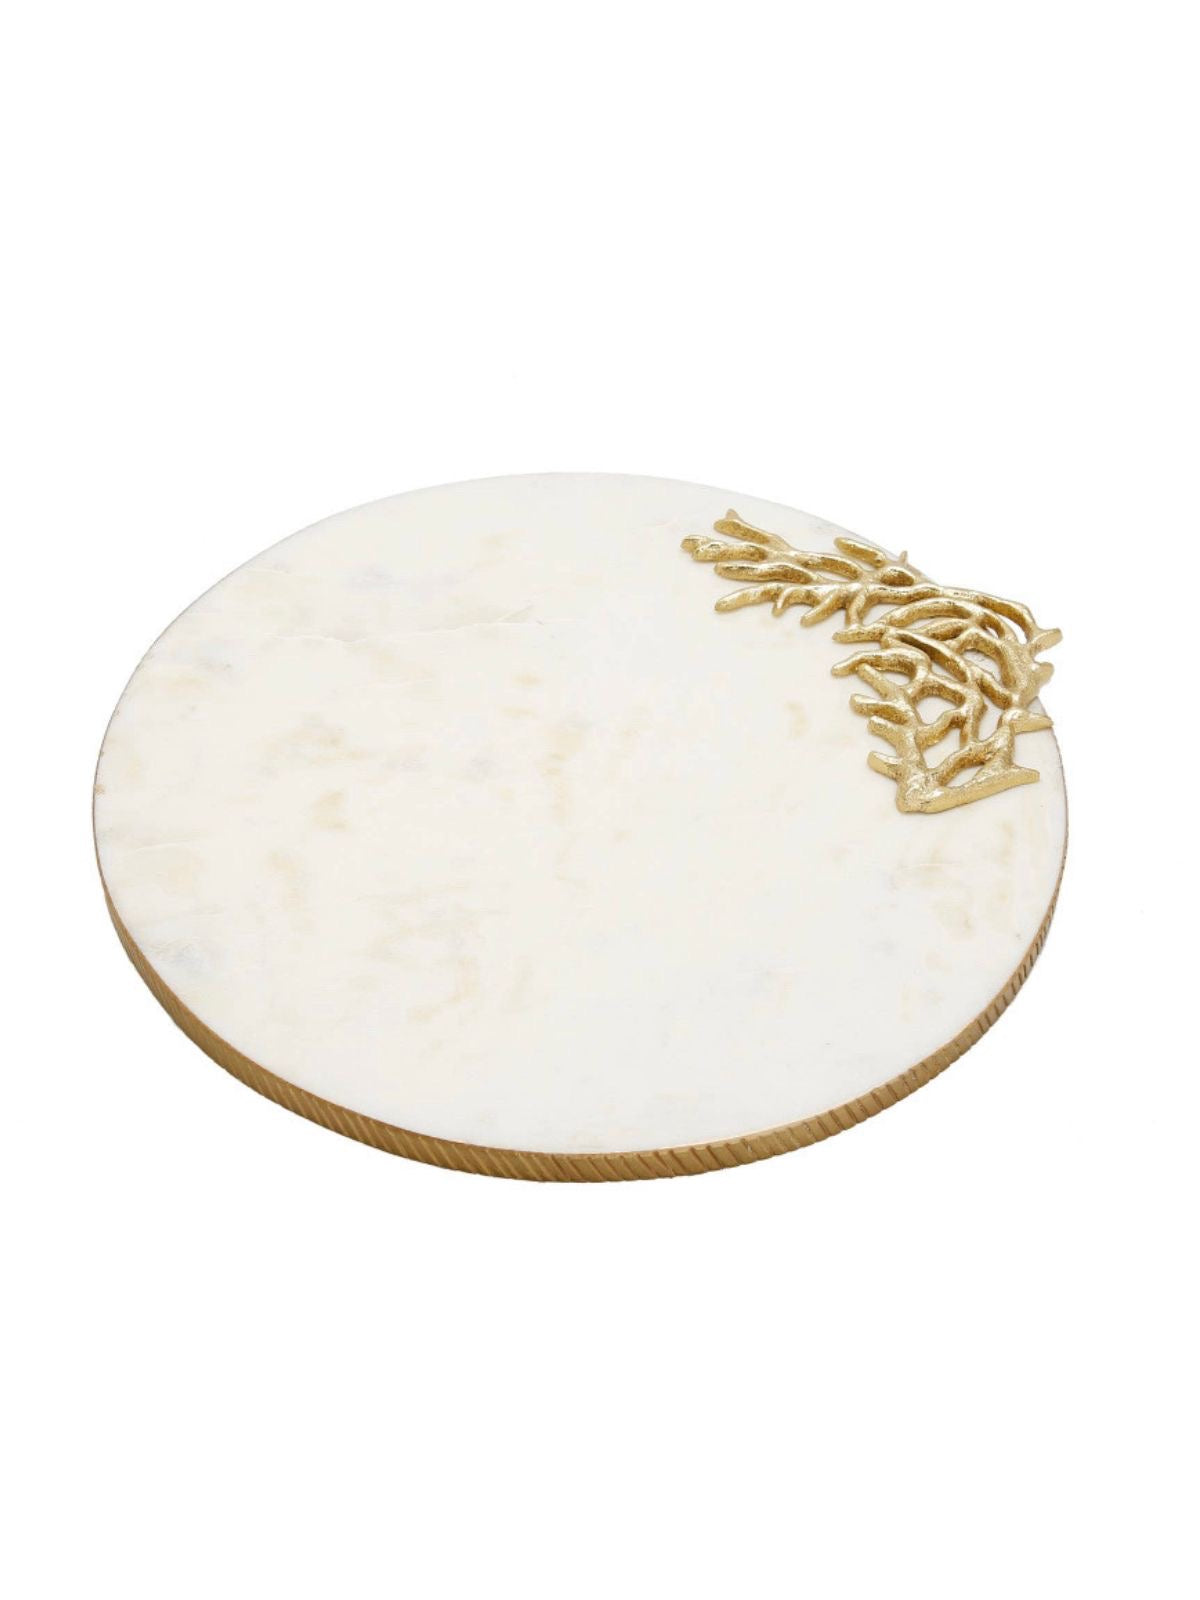 13D Round White Marble Serving Tray with Luxury Gold Branch Details and Gold Rim - KYA Home Decor